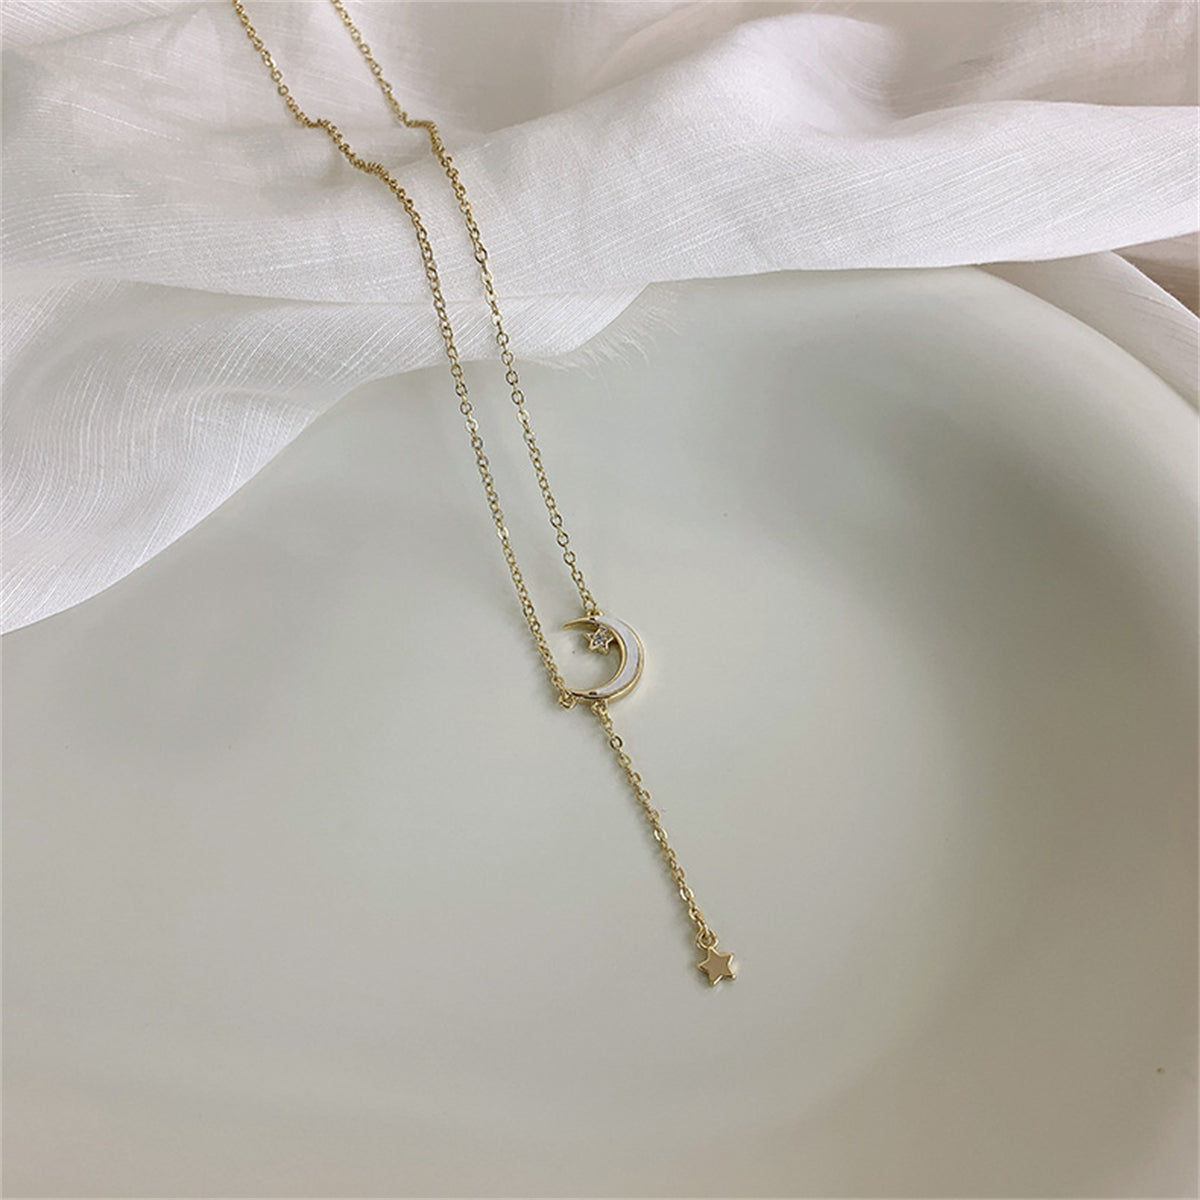 White Enamel & 18K Gold-Plated Moon Star Pendant Necklace